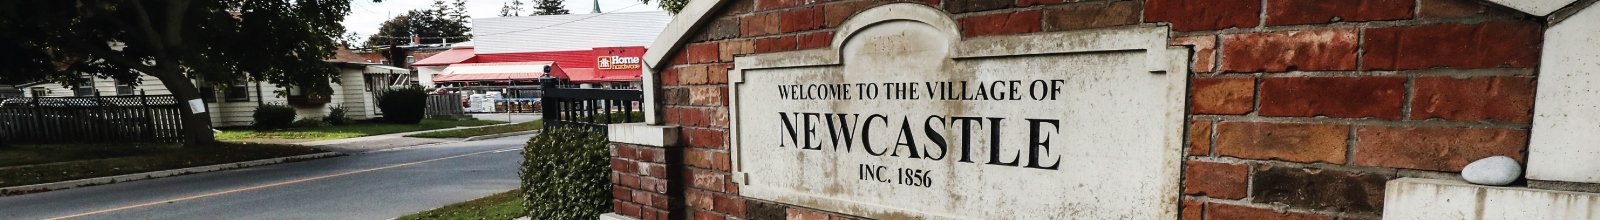 Welcome to Newcastle Sign